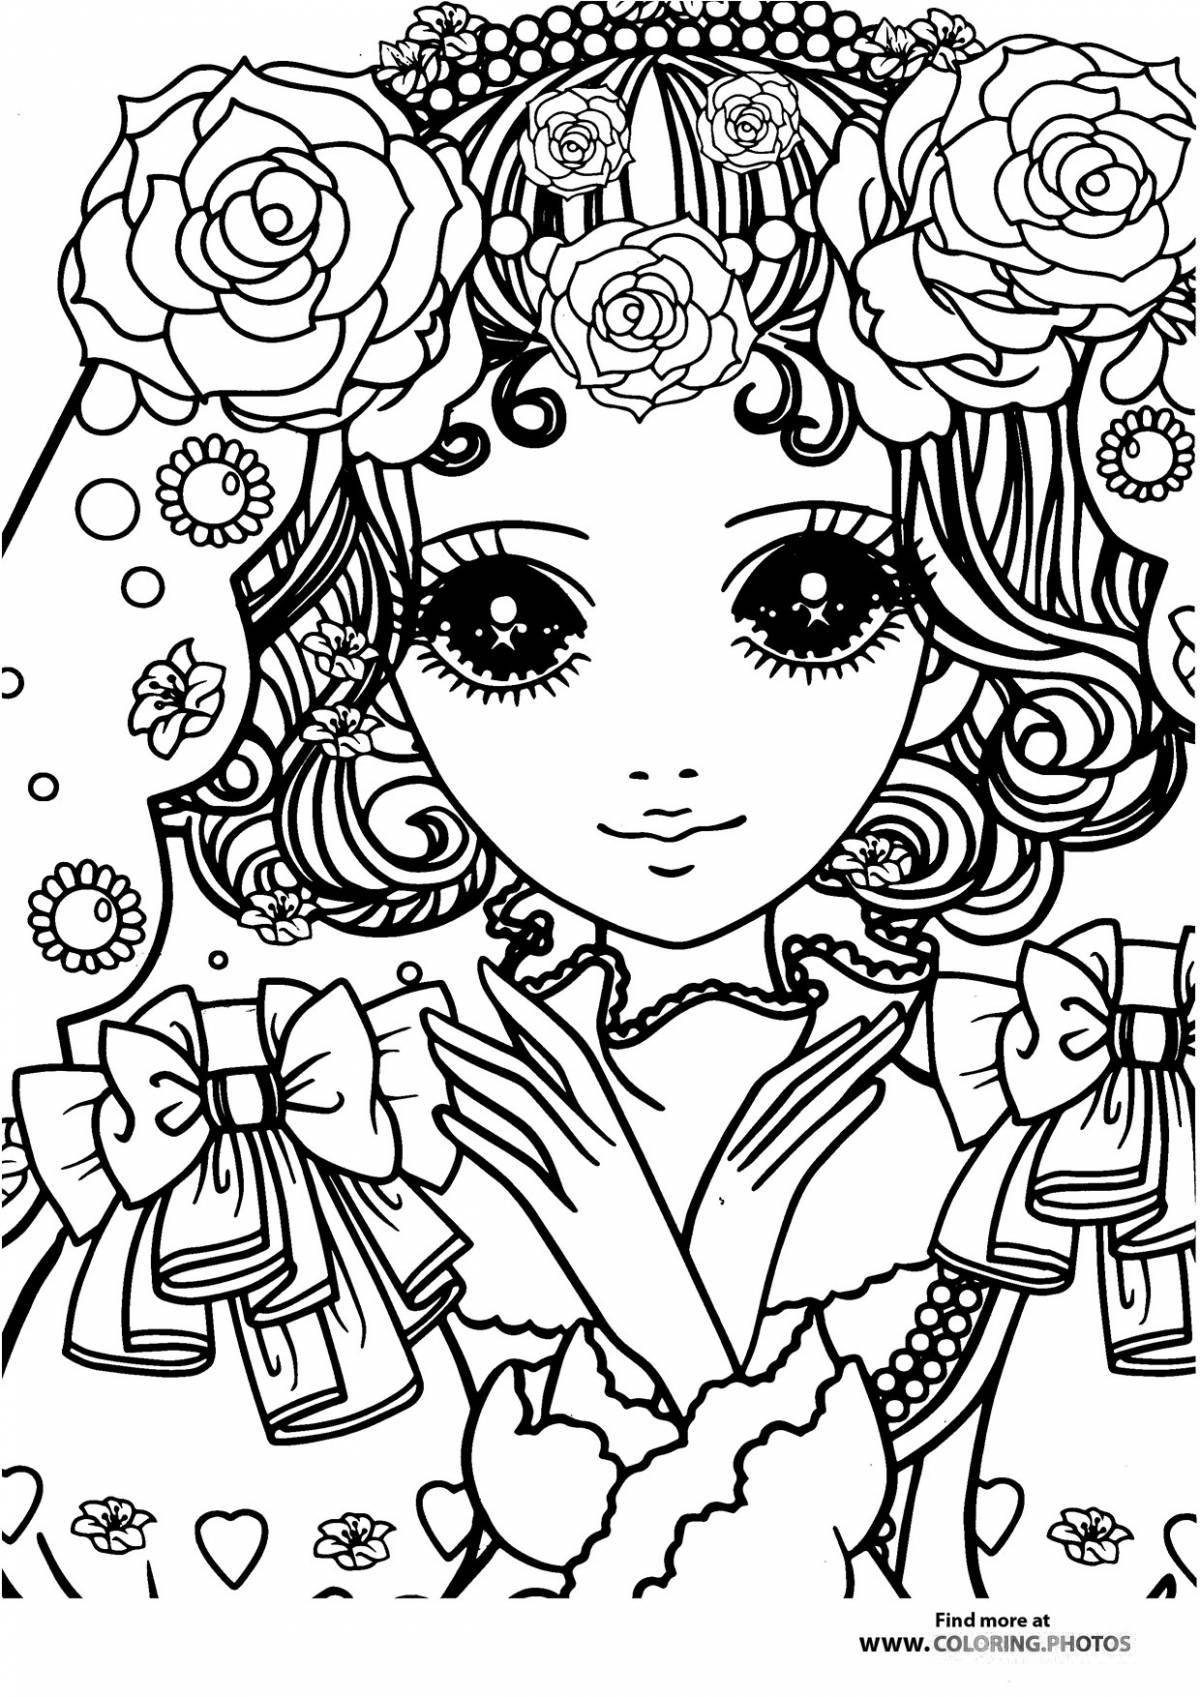 Cute coloring book for 16-17 year old girls